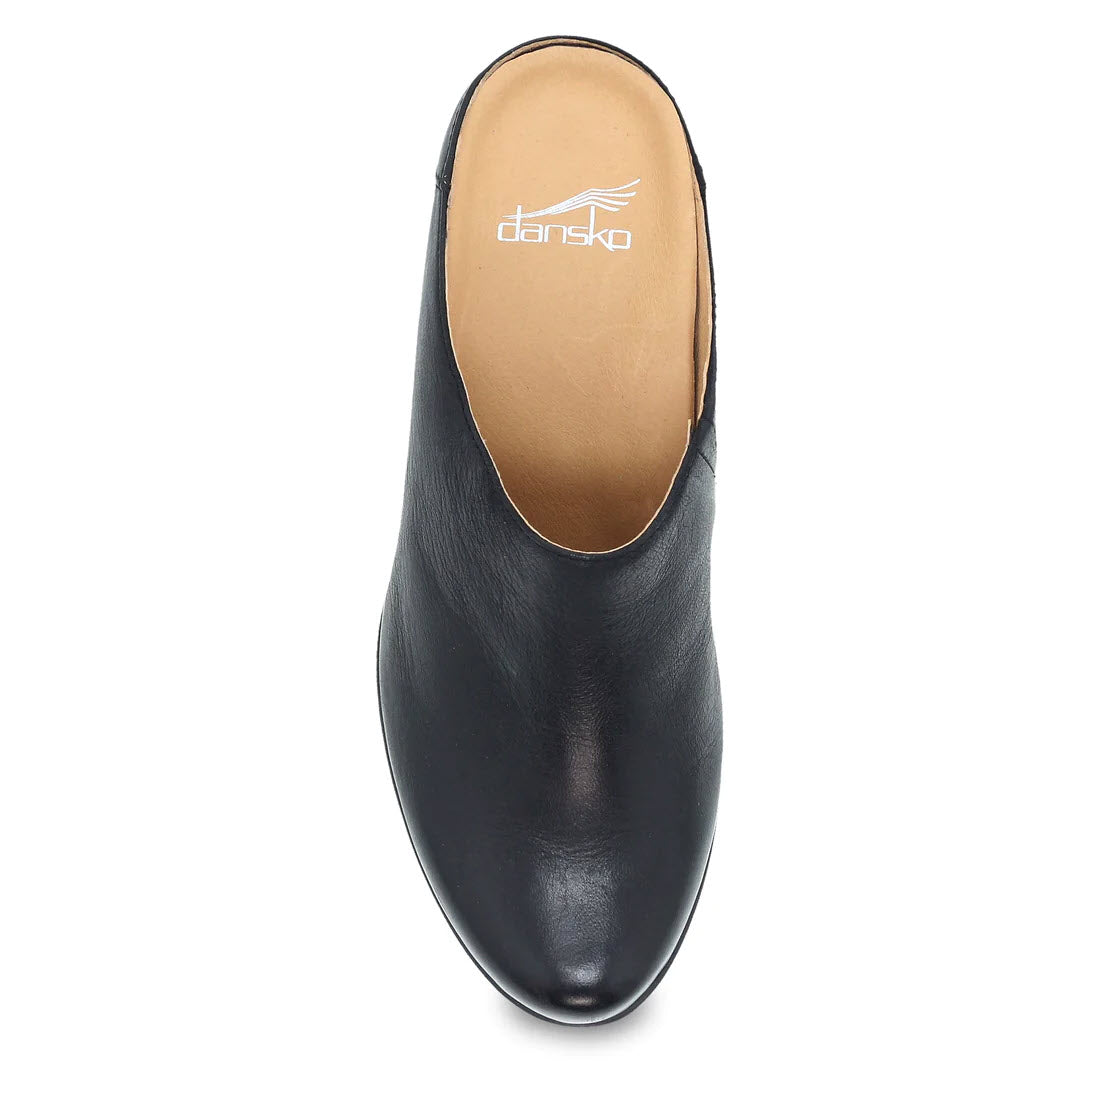 Top view of a single black leather Dansko Carrie backless mule with a rounded toe and visible brand name on the insole.